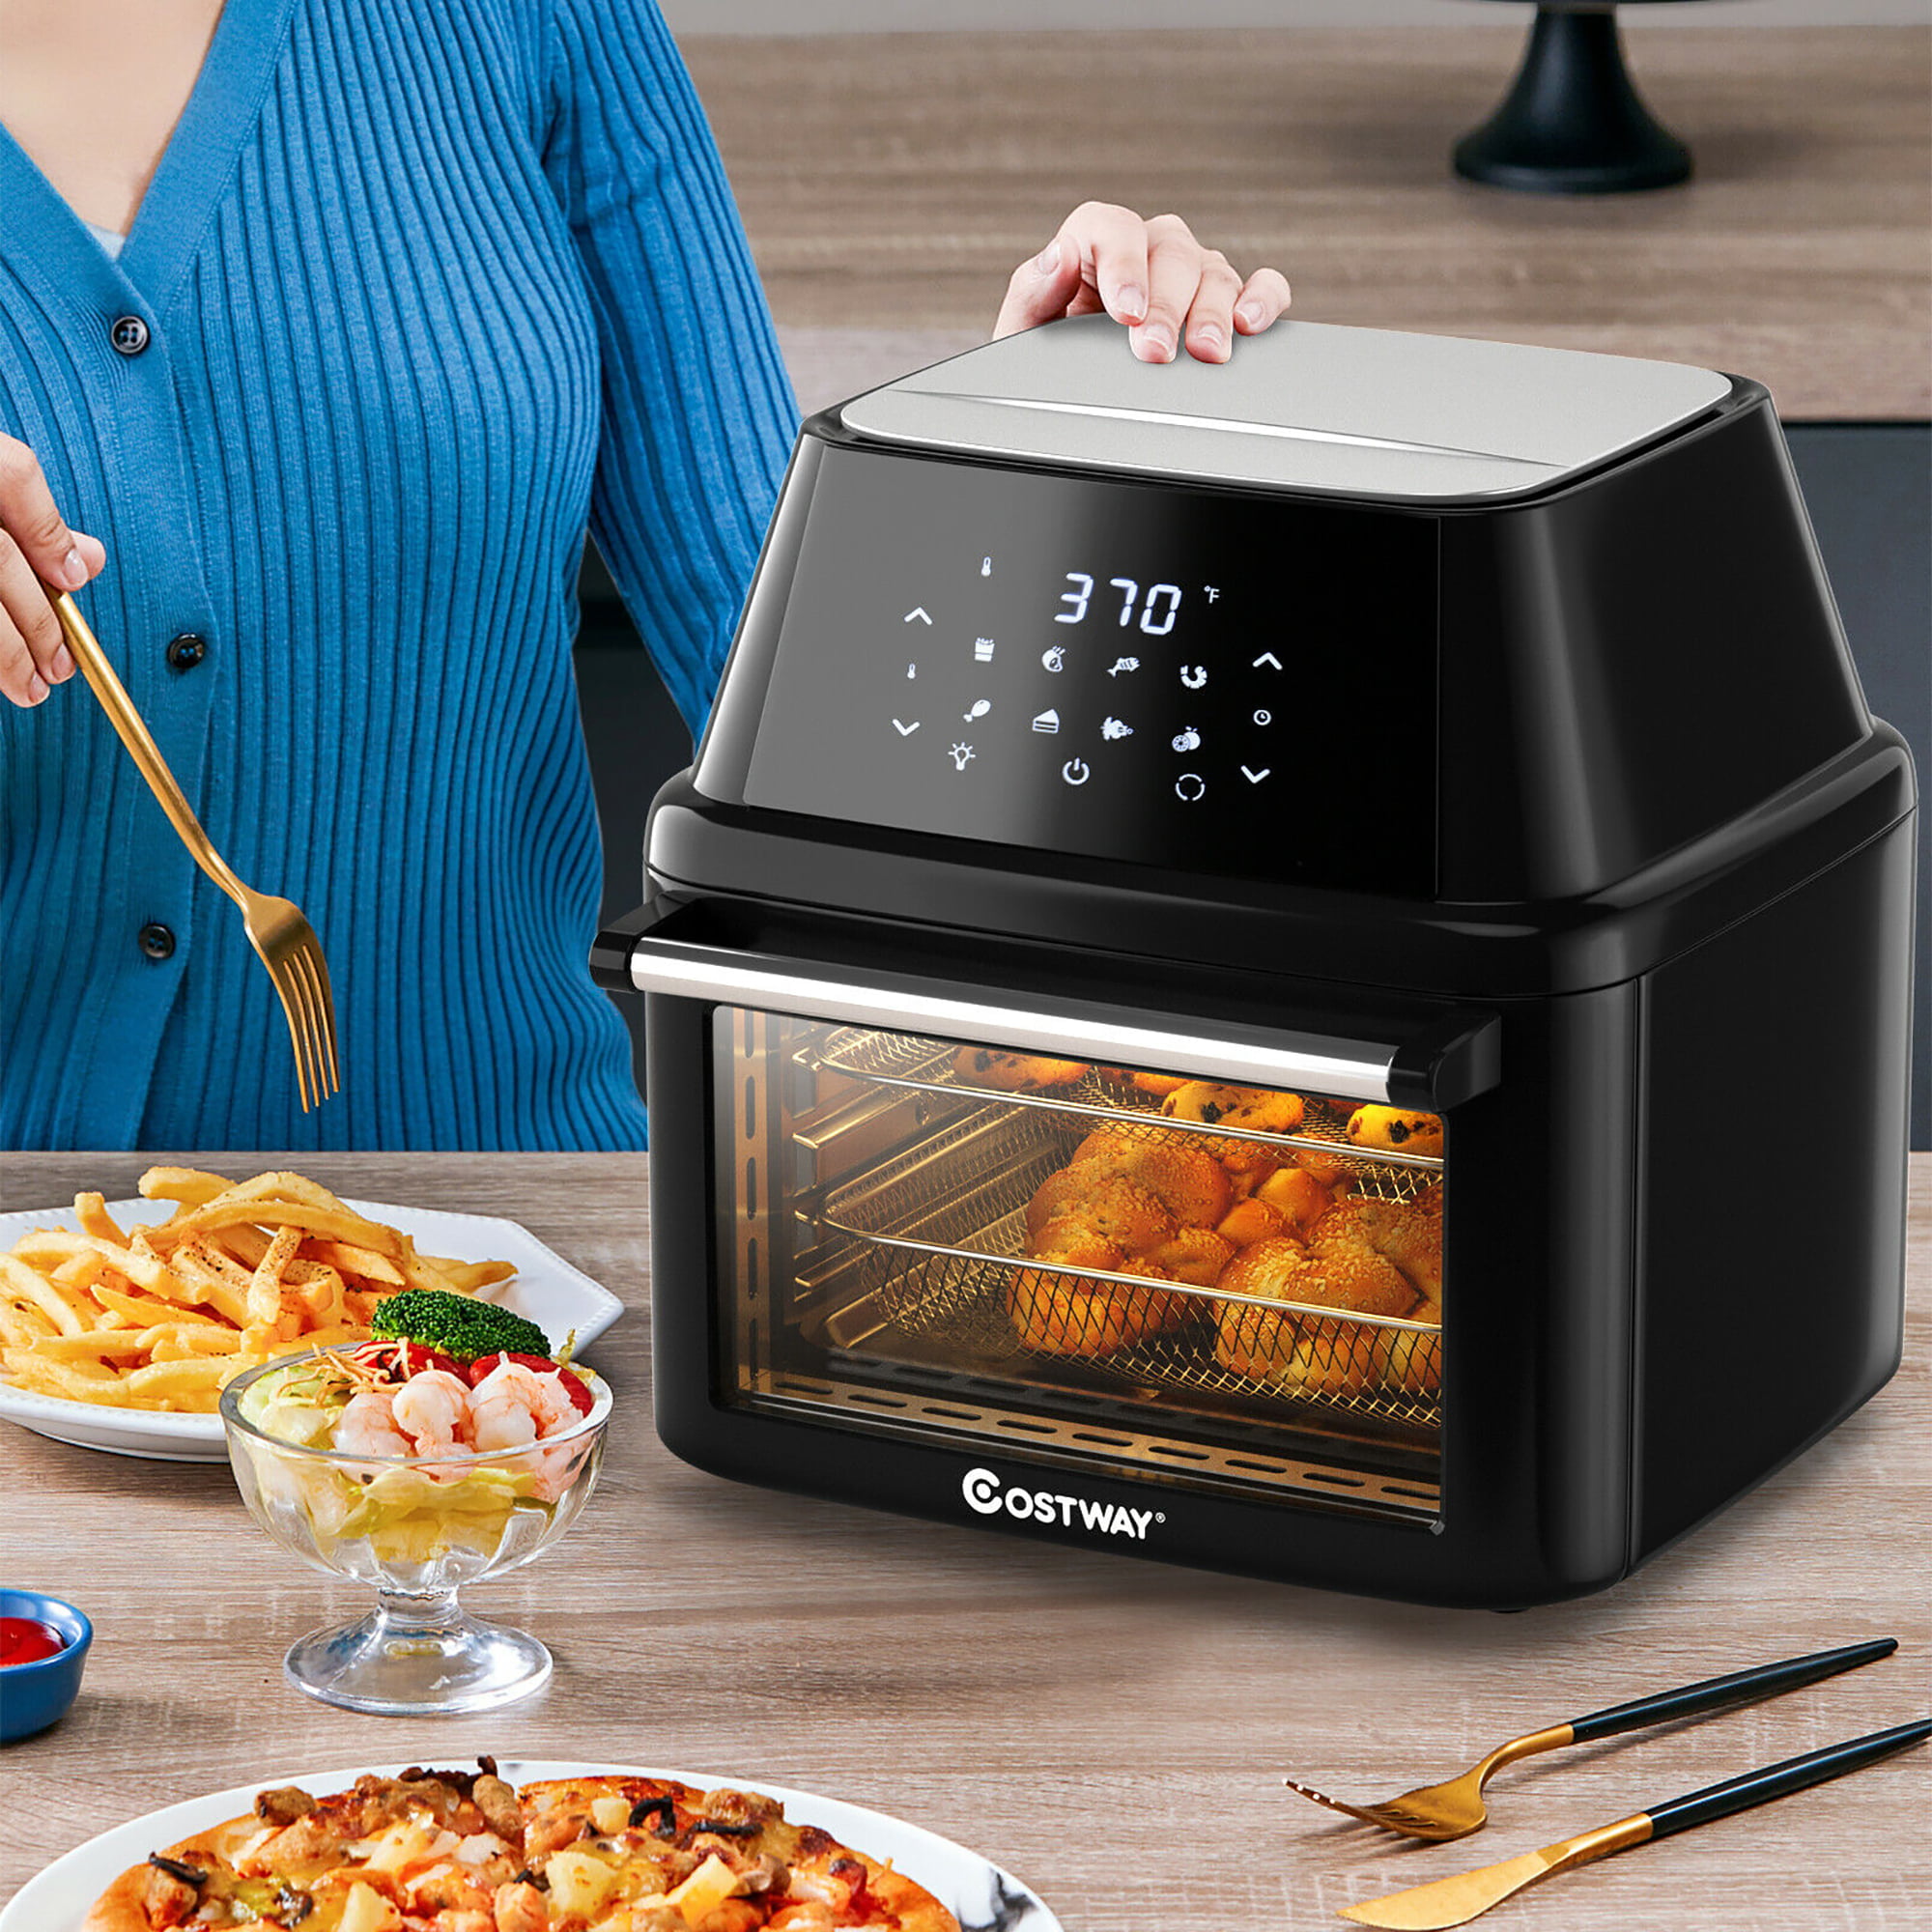 GZMR 19 qt Green Multi-Functional Air Fryer Oven 1800W Dehydrator  Rotisserie, Programmable, 8 Preset Cooking Choices, Oil-less Cooking in the Air  Fryers department at